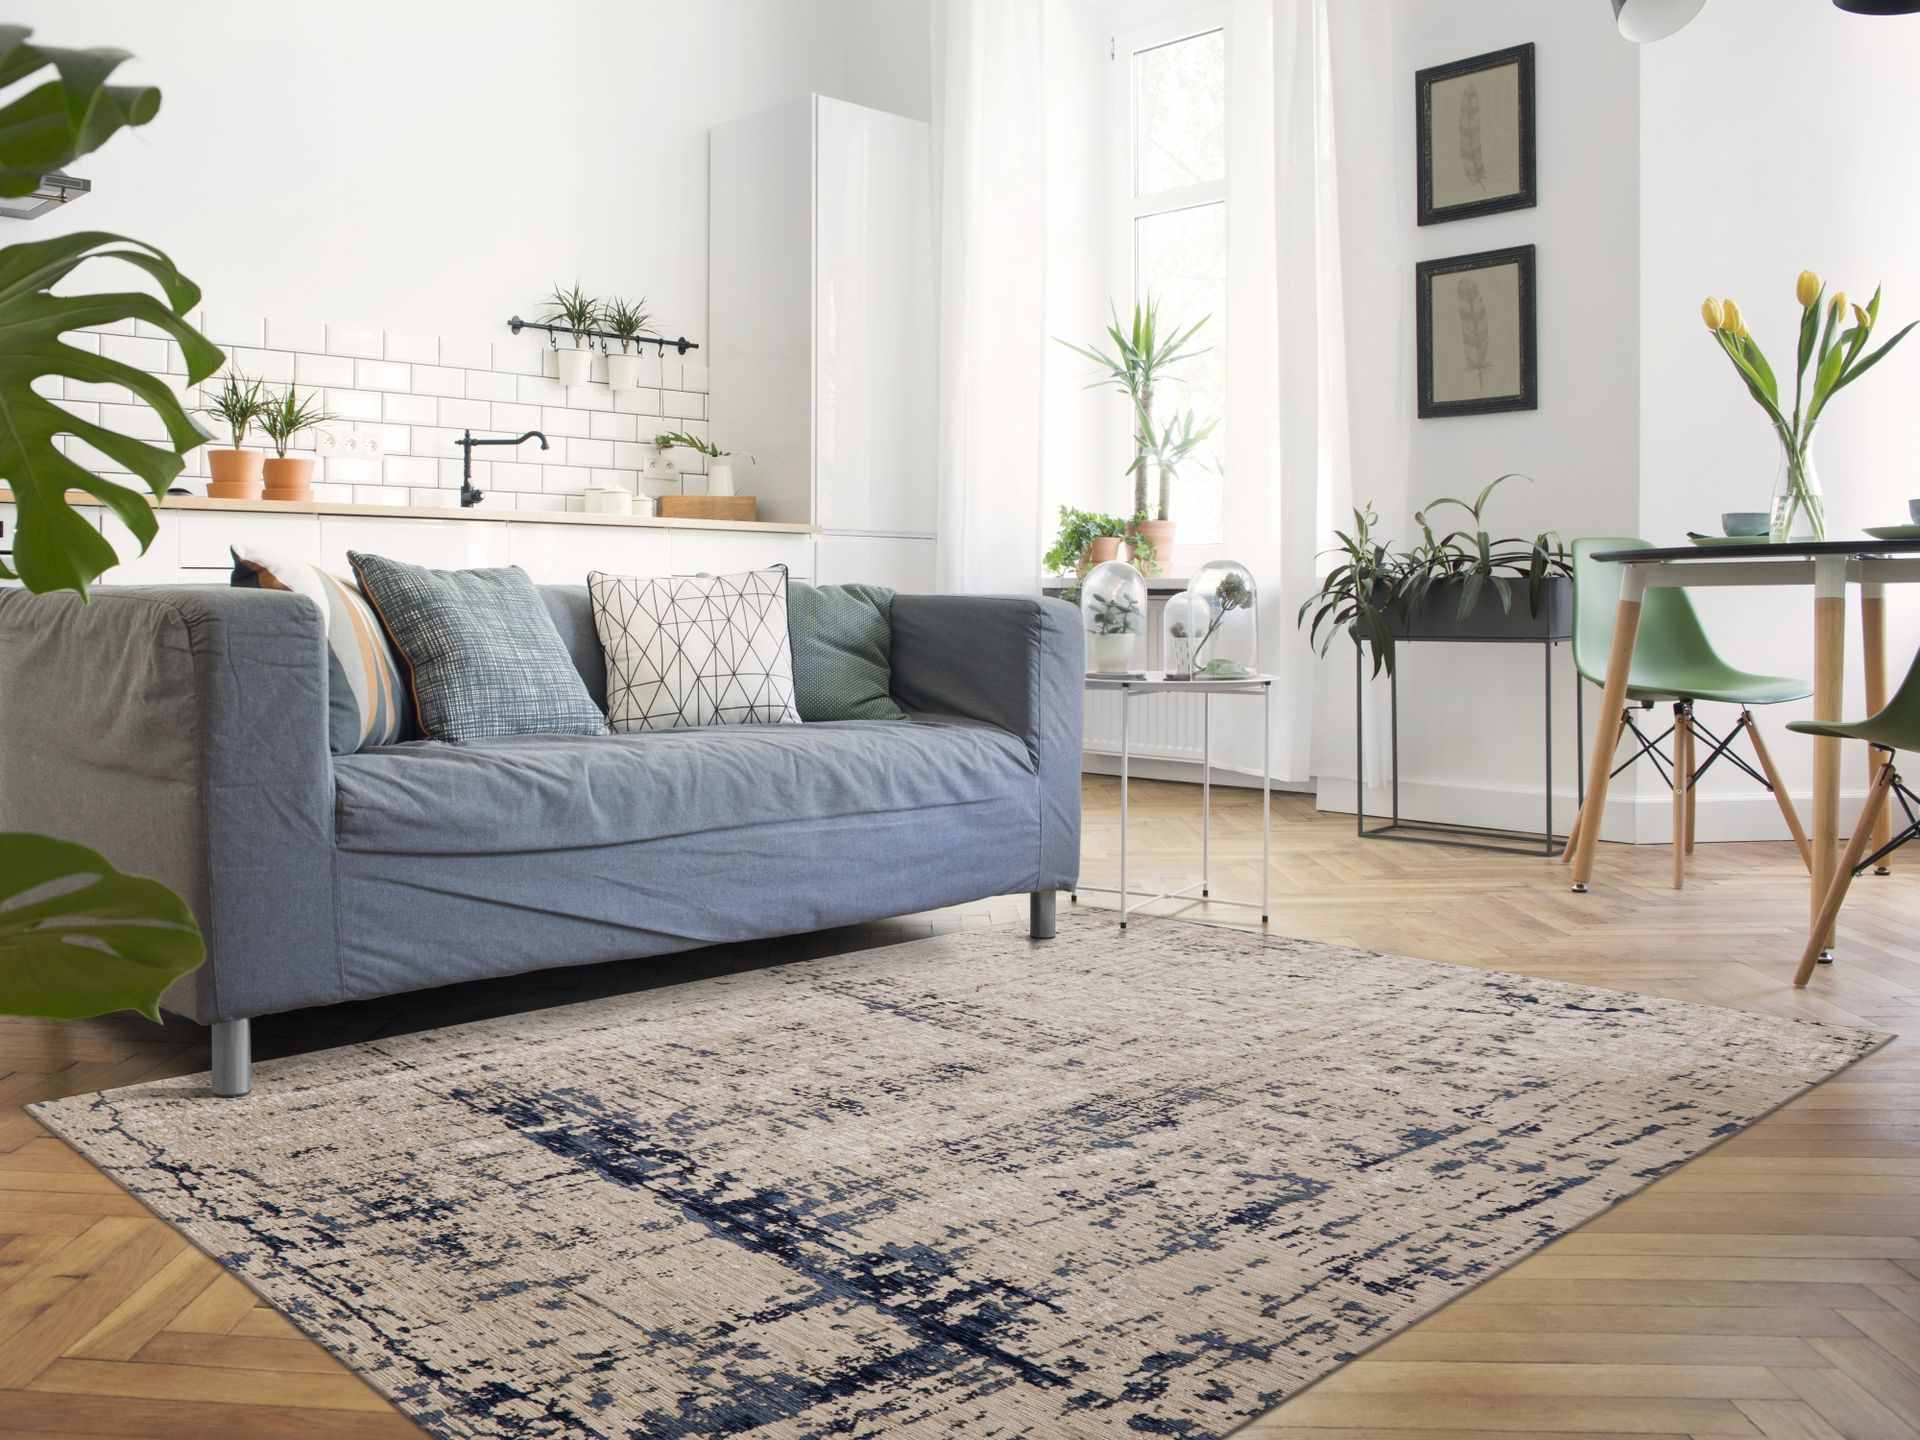 Photo of a vintage-look chenille rug in blue in front of a blue couch.